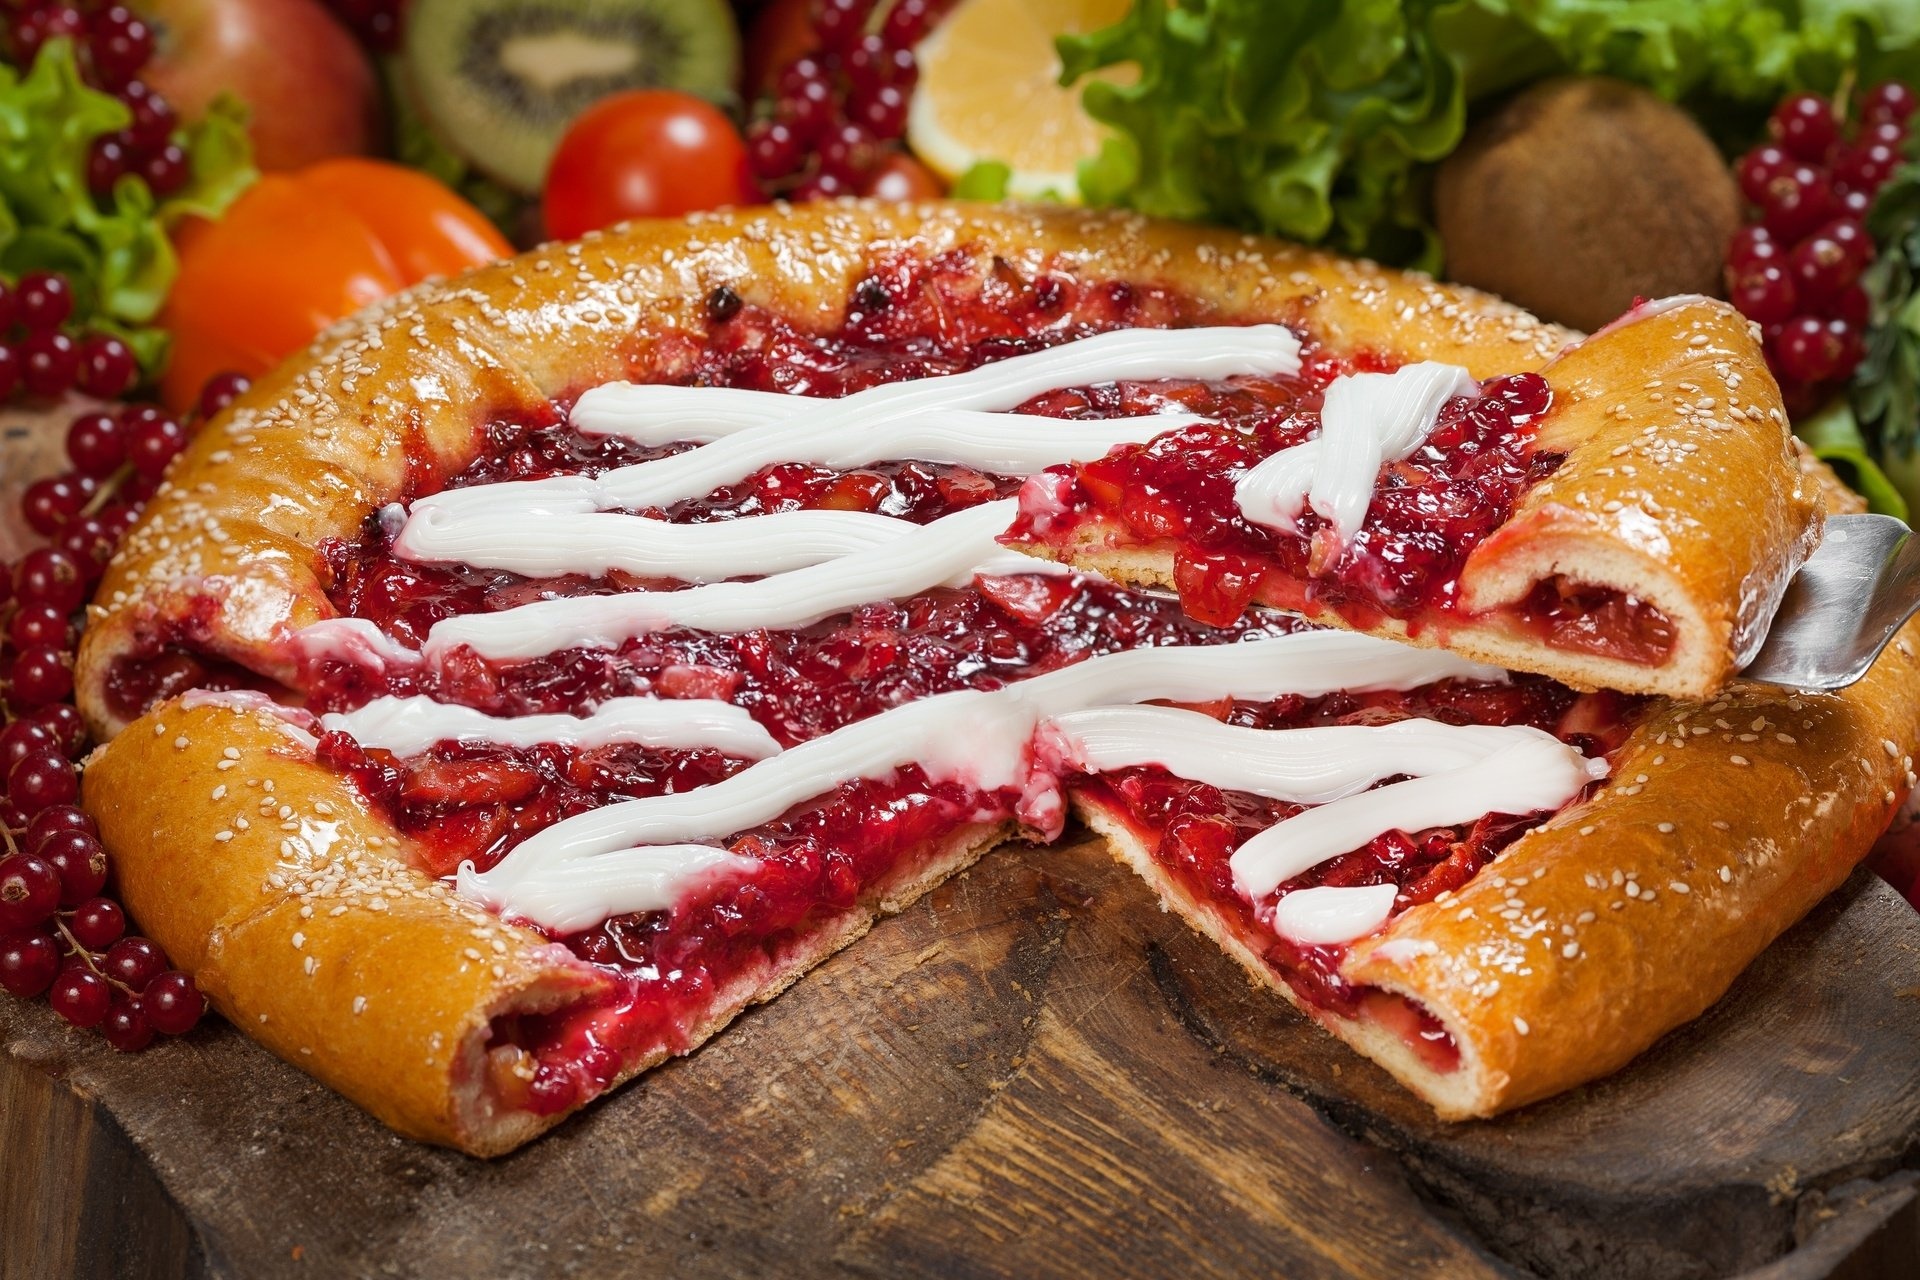 Pie: Contains a sweet filling of fruit, custard, or a pastry cream. 1920x1280 HD Wallpaper.